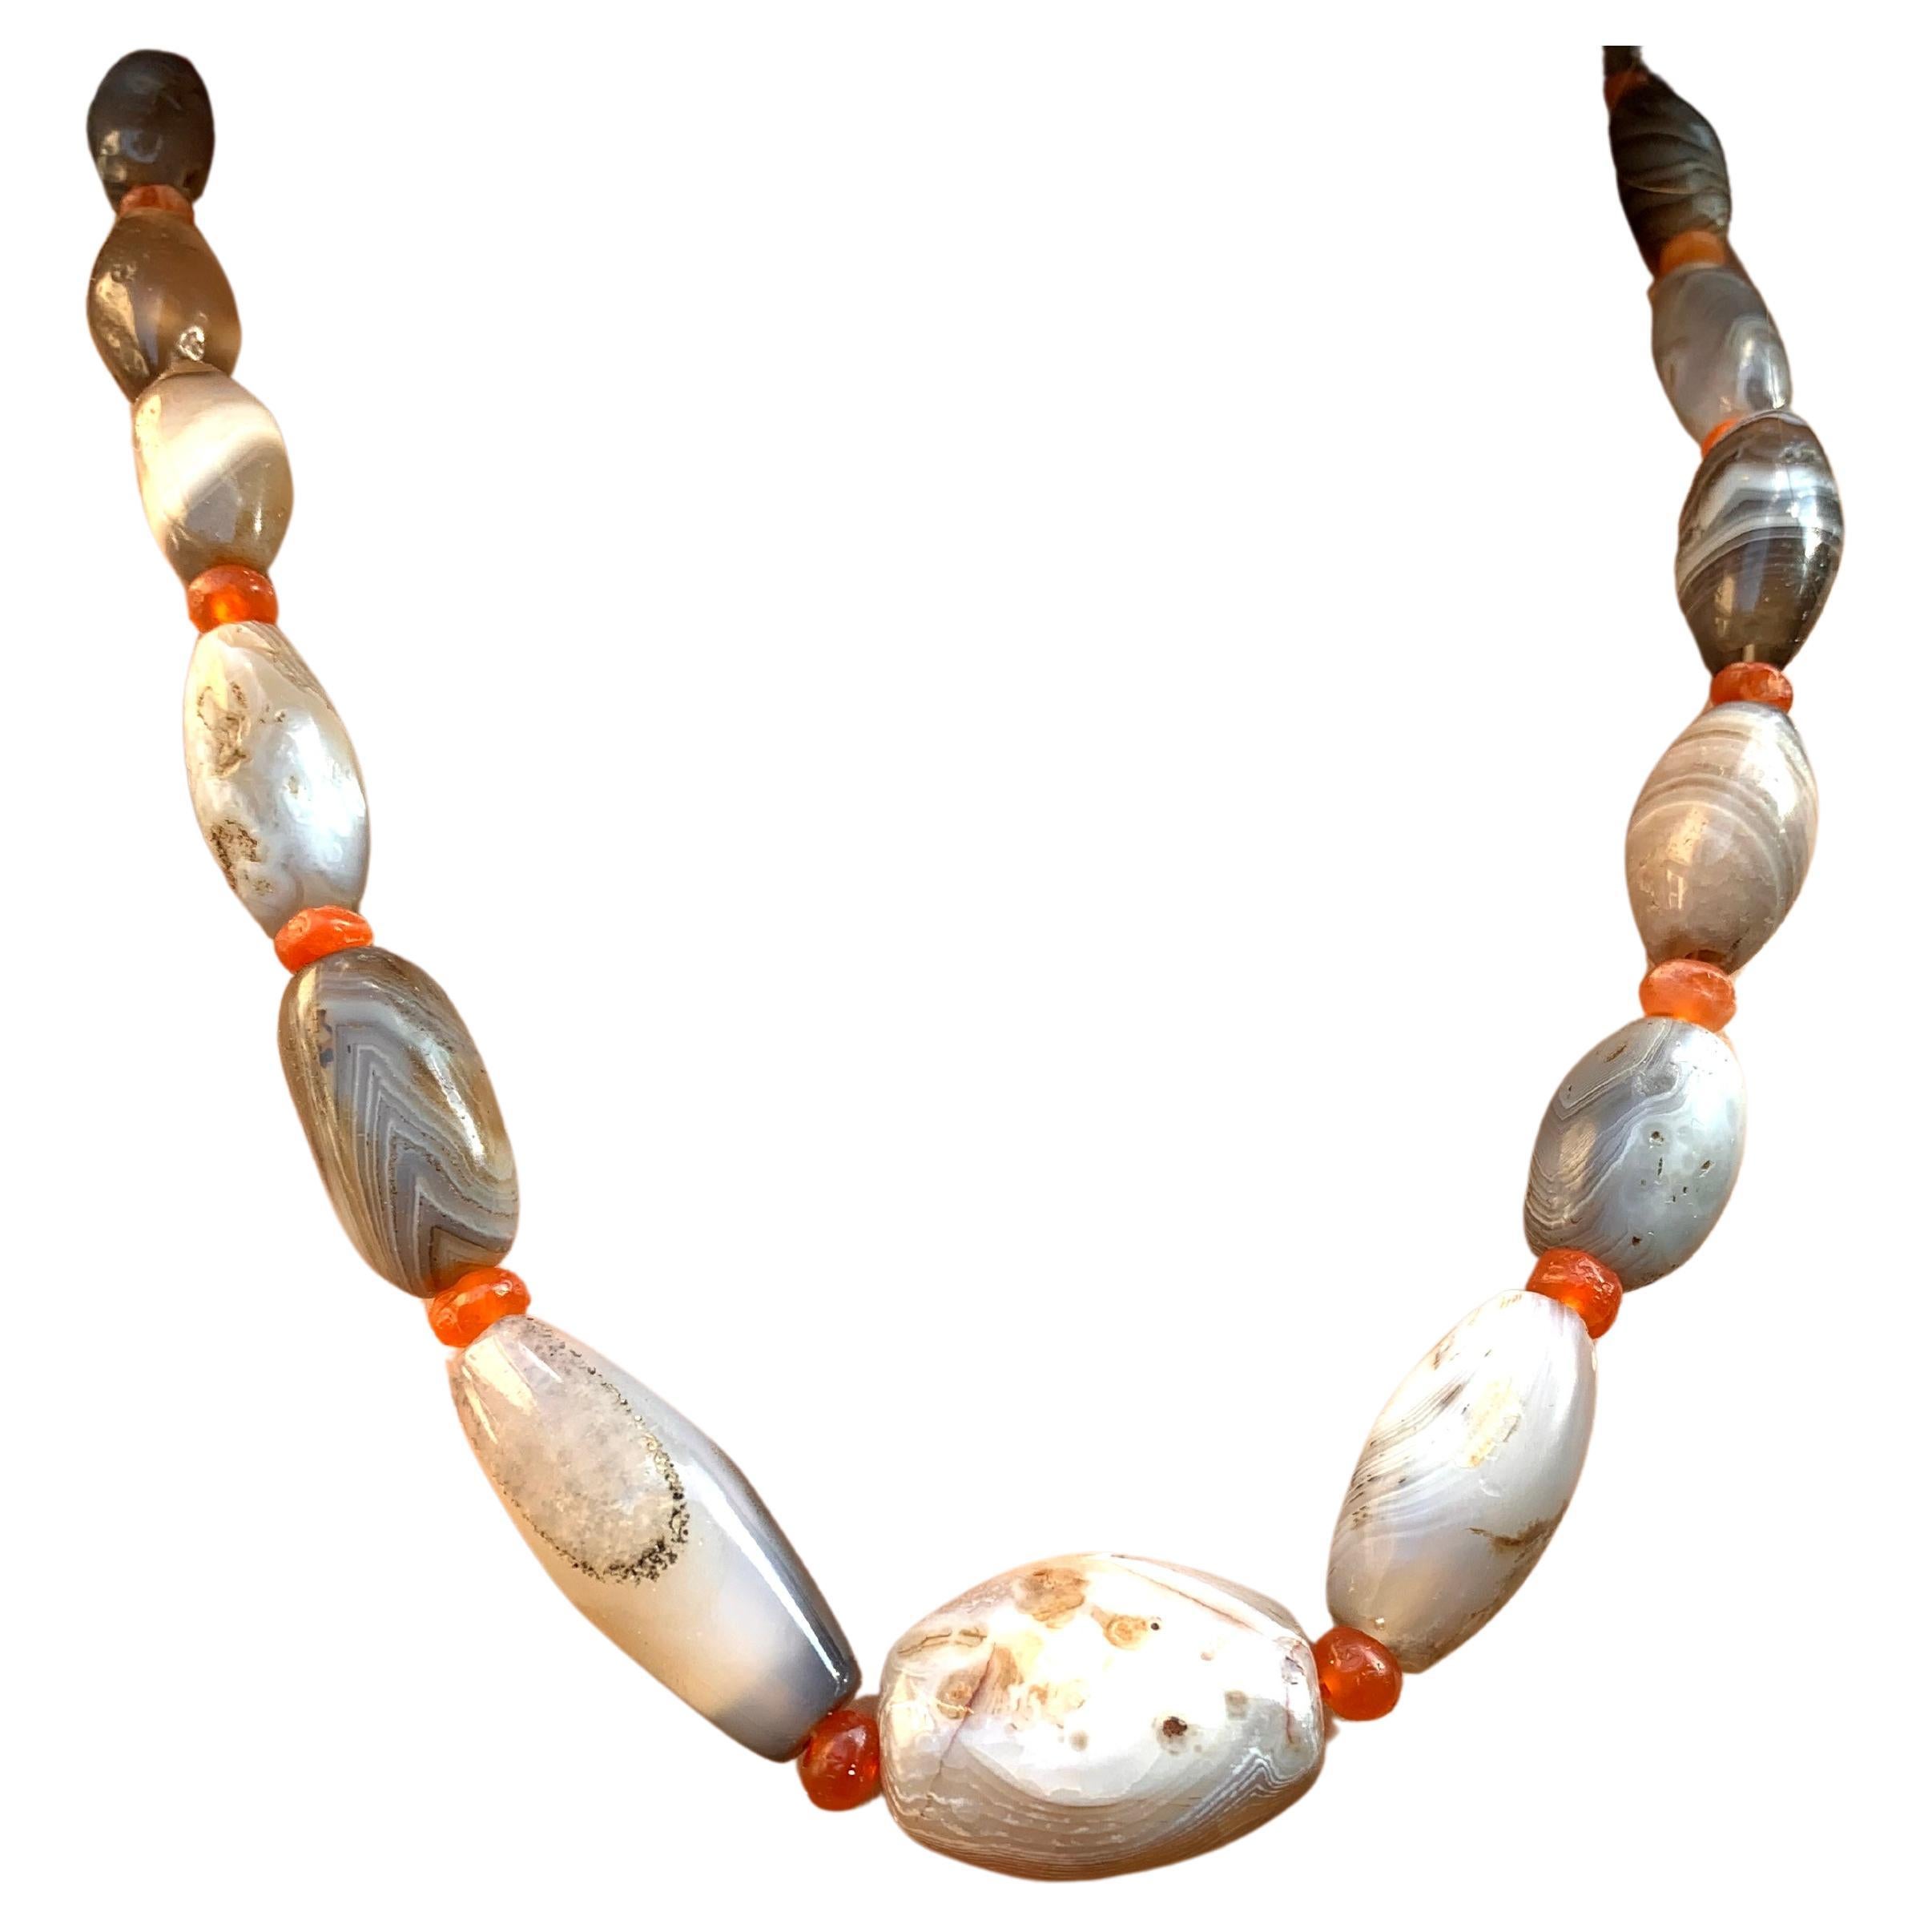 What were ancient necklaces made of?